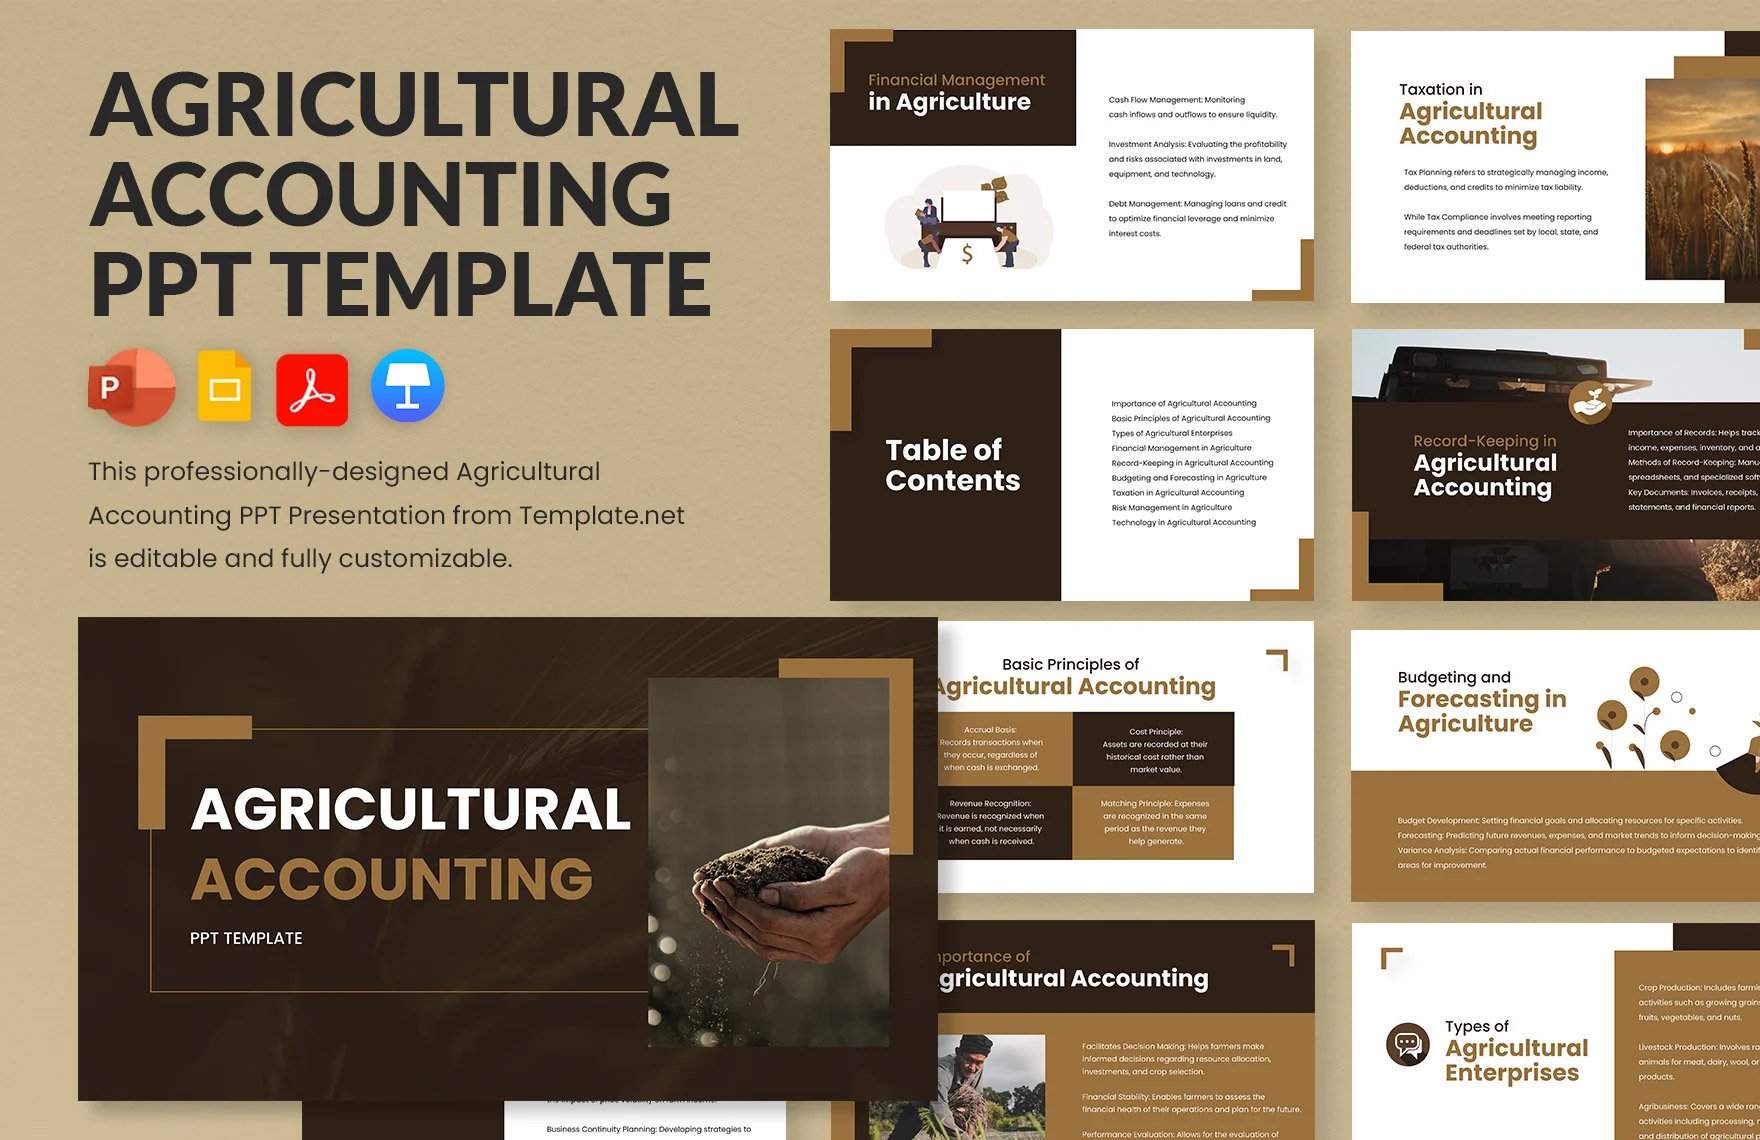 Agricultural Accounting PPT Template in PDF, PowerPoint, Google Slides, Apple Keynote